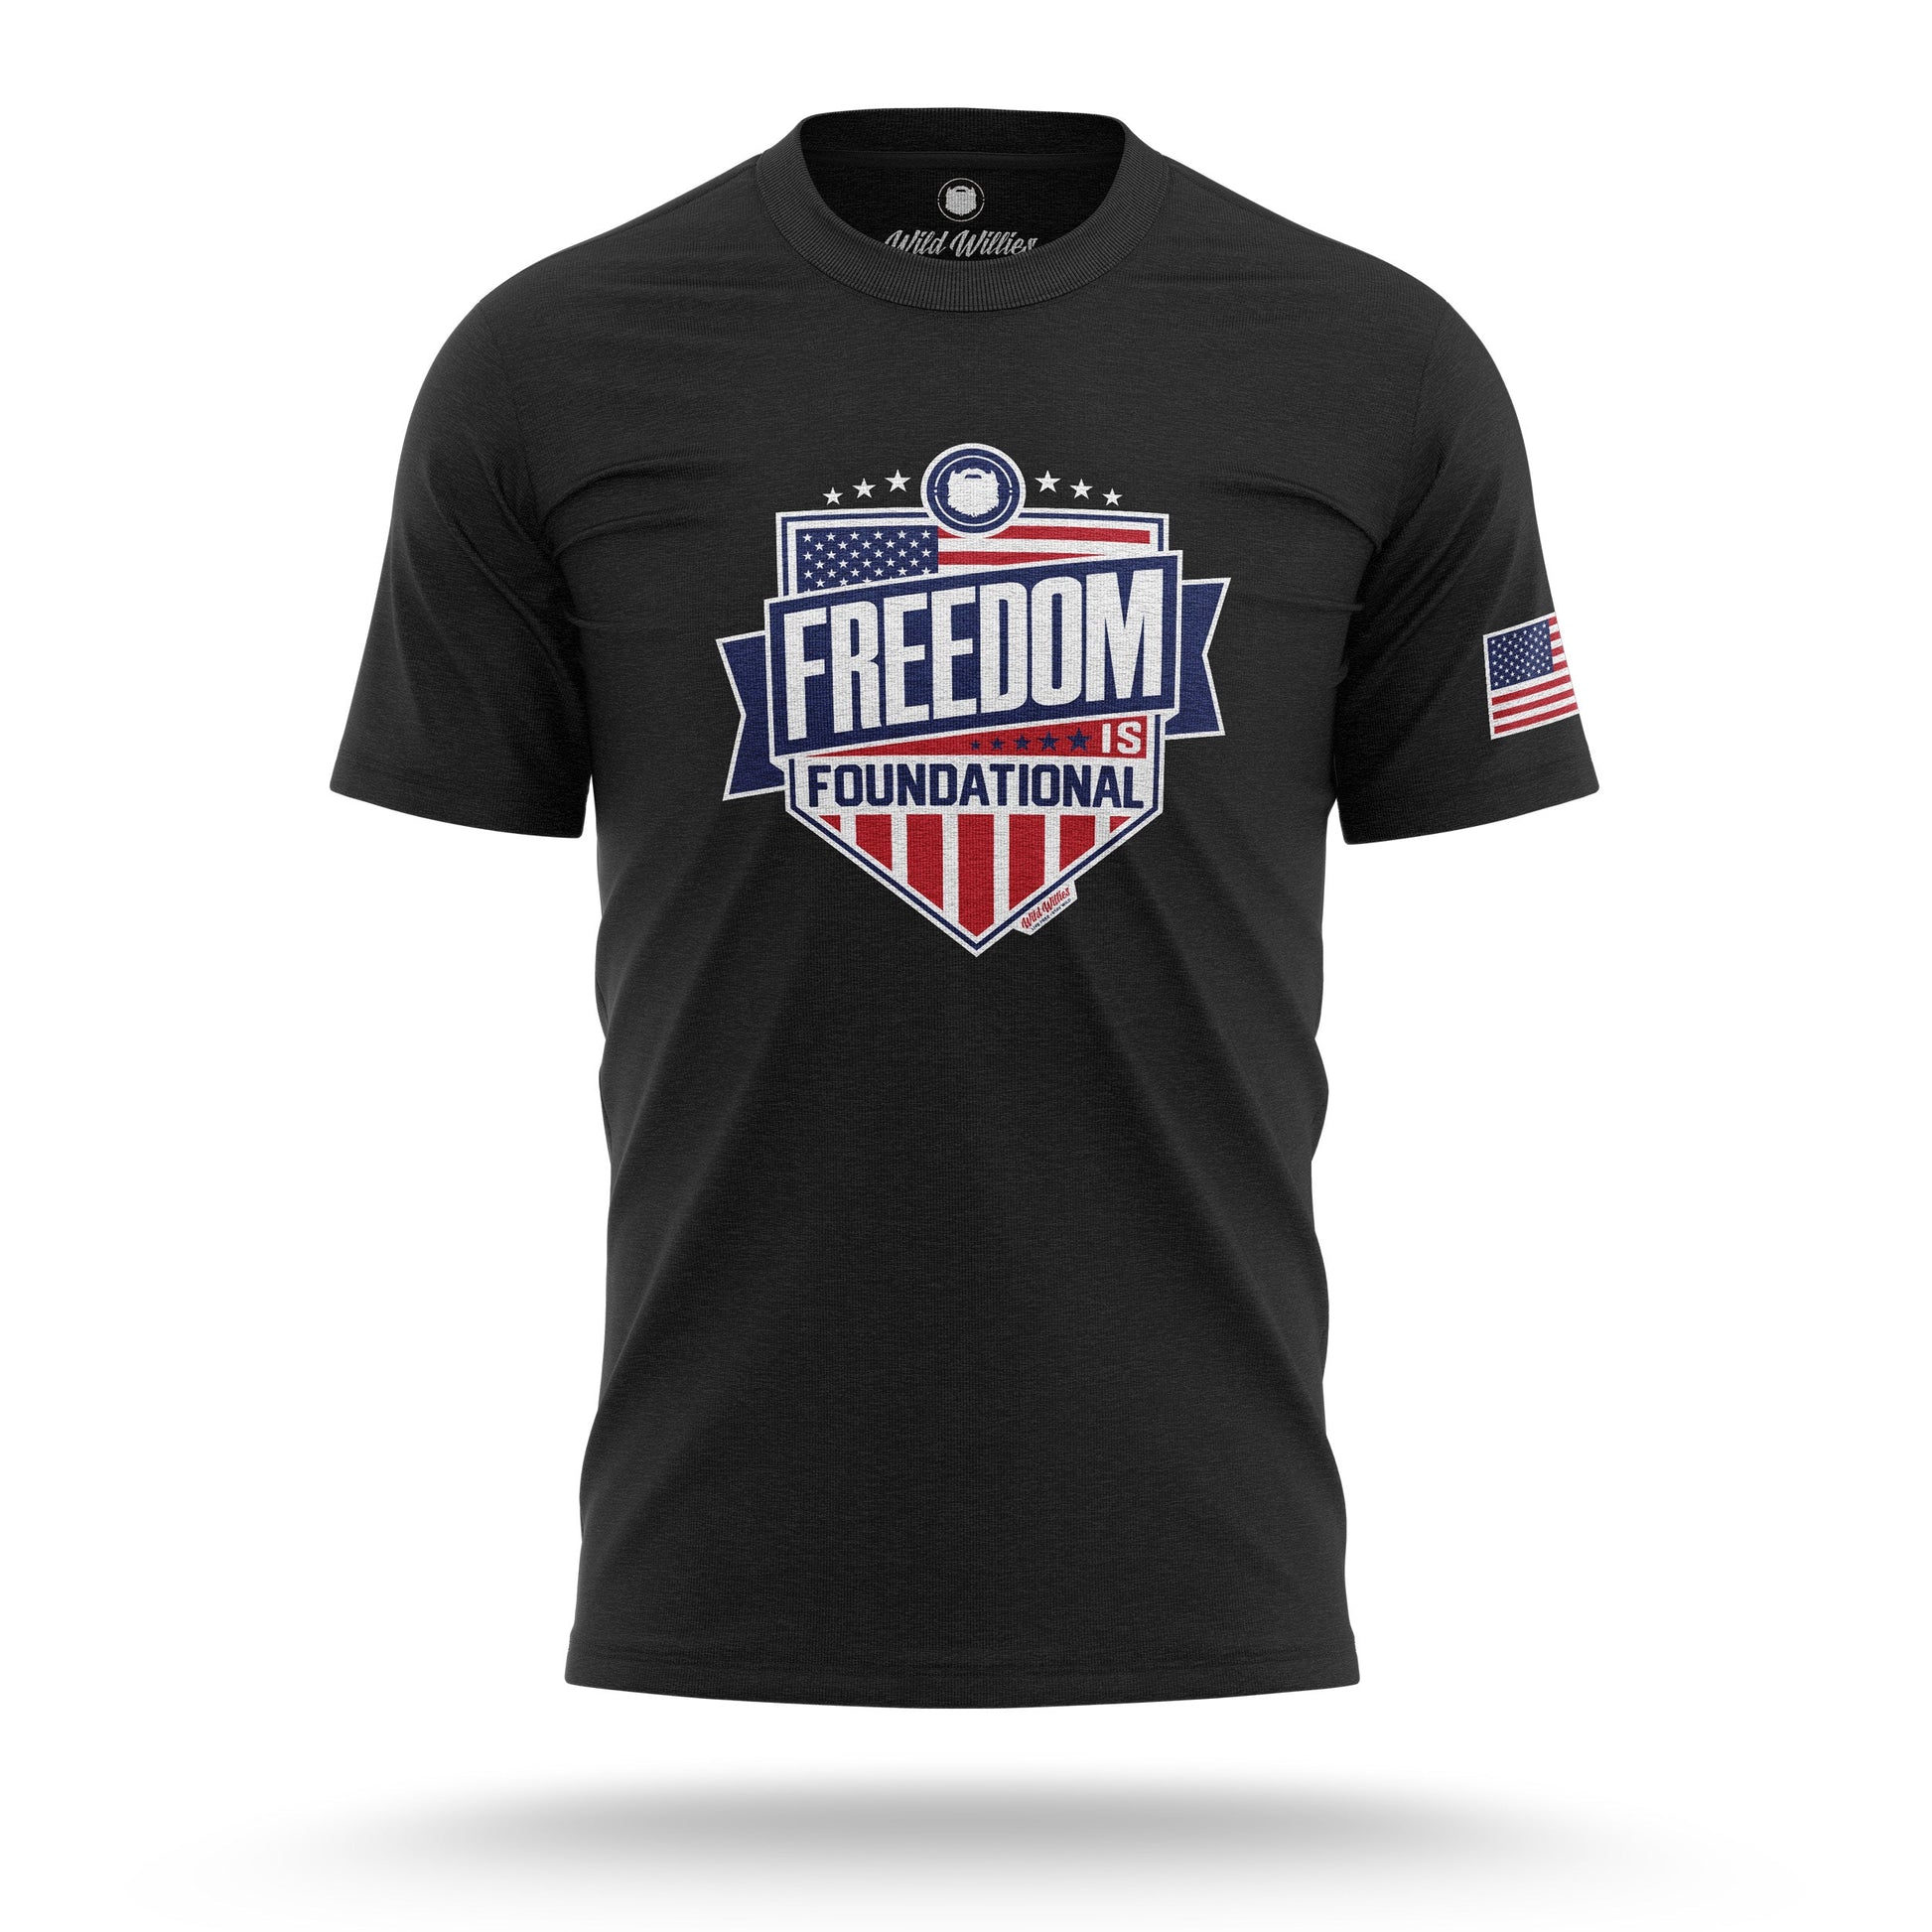 Freedom is Foundational - T-Shirt T-Shirt Wild-Willies S Black 